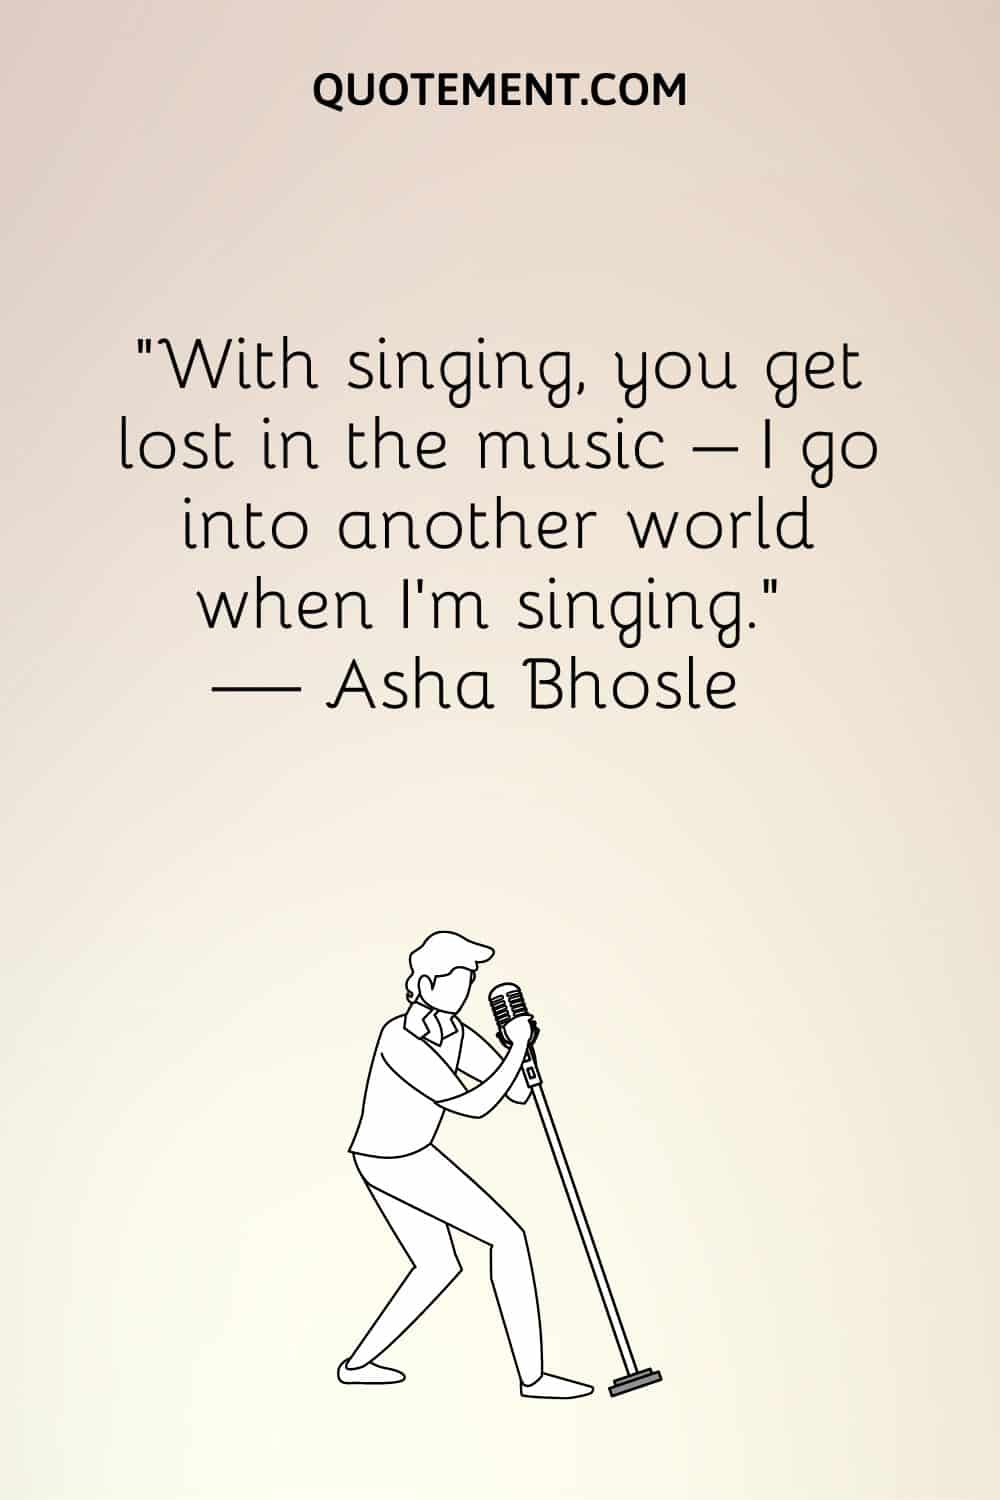 “With singing, you get lost in the music – I go into another world when I’m singing.” — Asha Bhosle